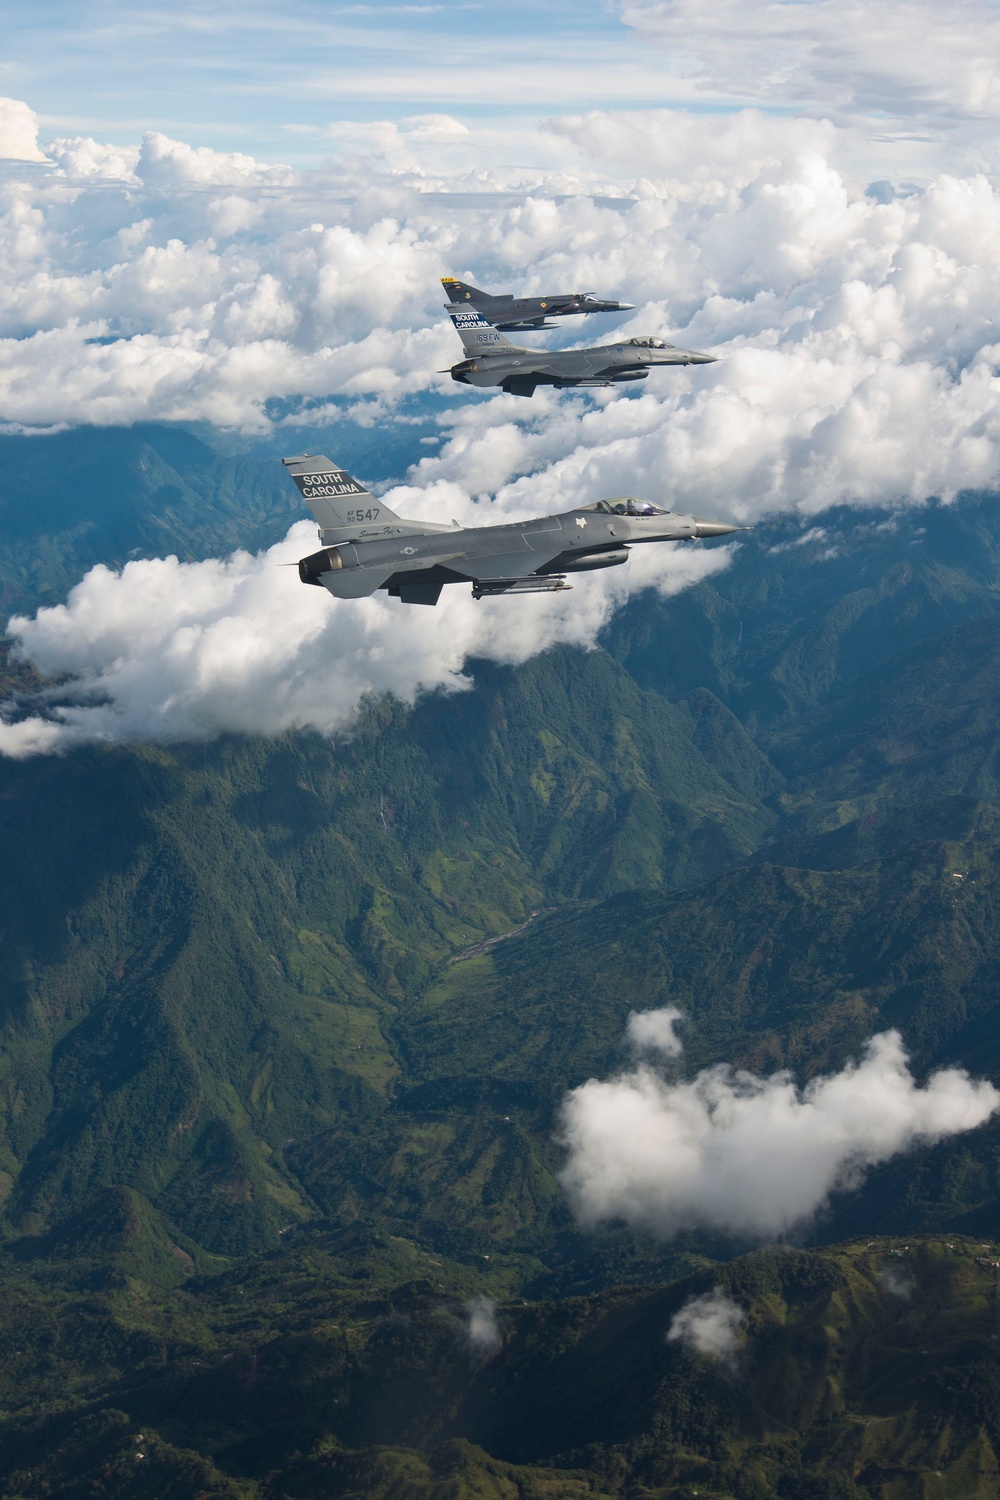 Relampago 2014: South Carolina Air National Guard and Colombian air force combined air cooperation engagement